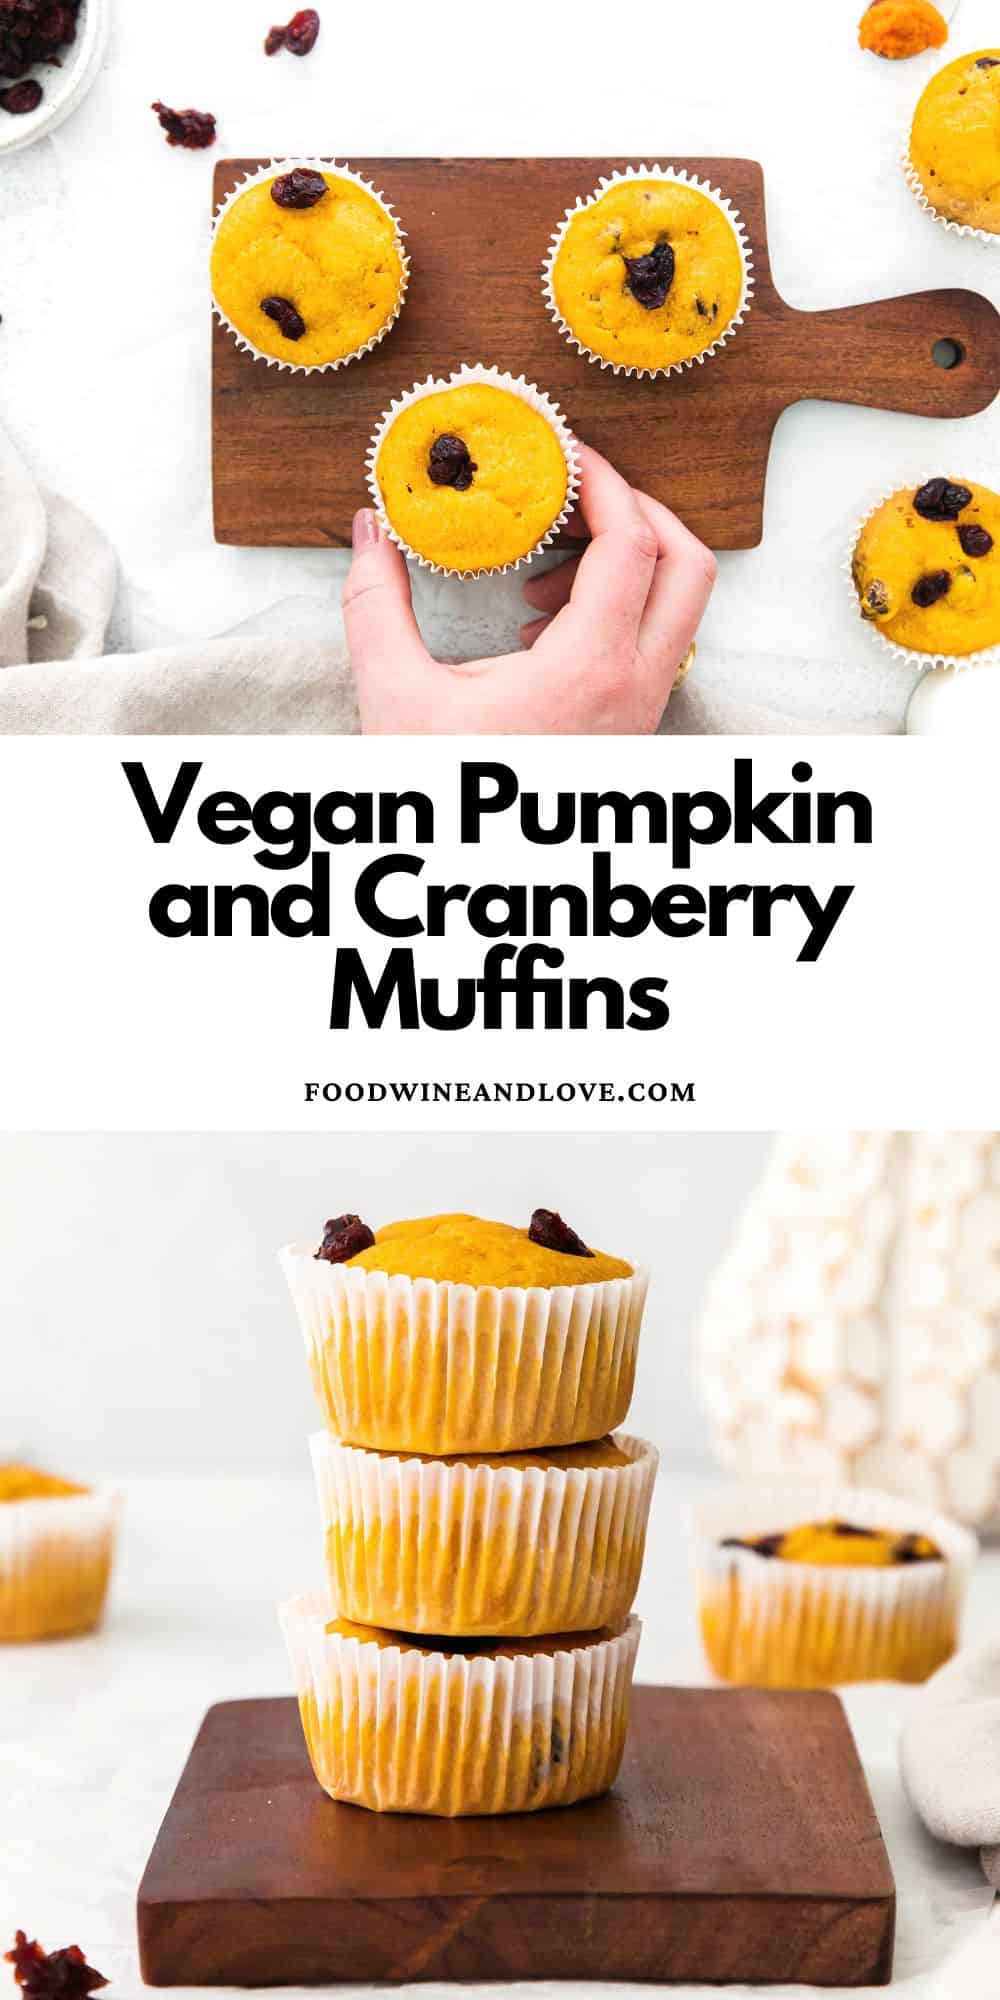 Vegan Pumpkin and Cranberry Muffins, a delicious and simple recipe for a flavorful fall inspired breakfast, brunch, or snack.